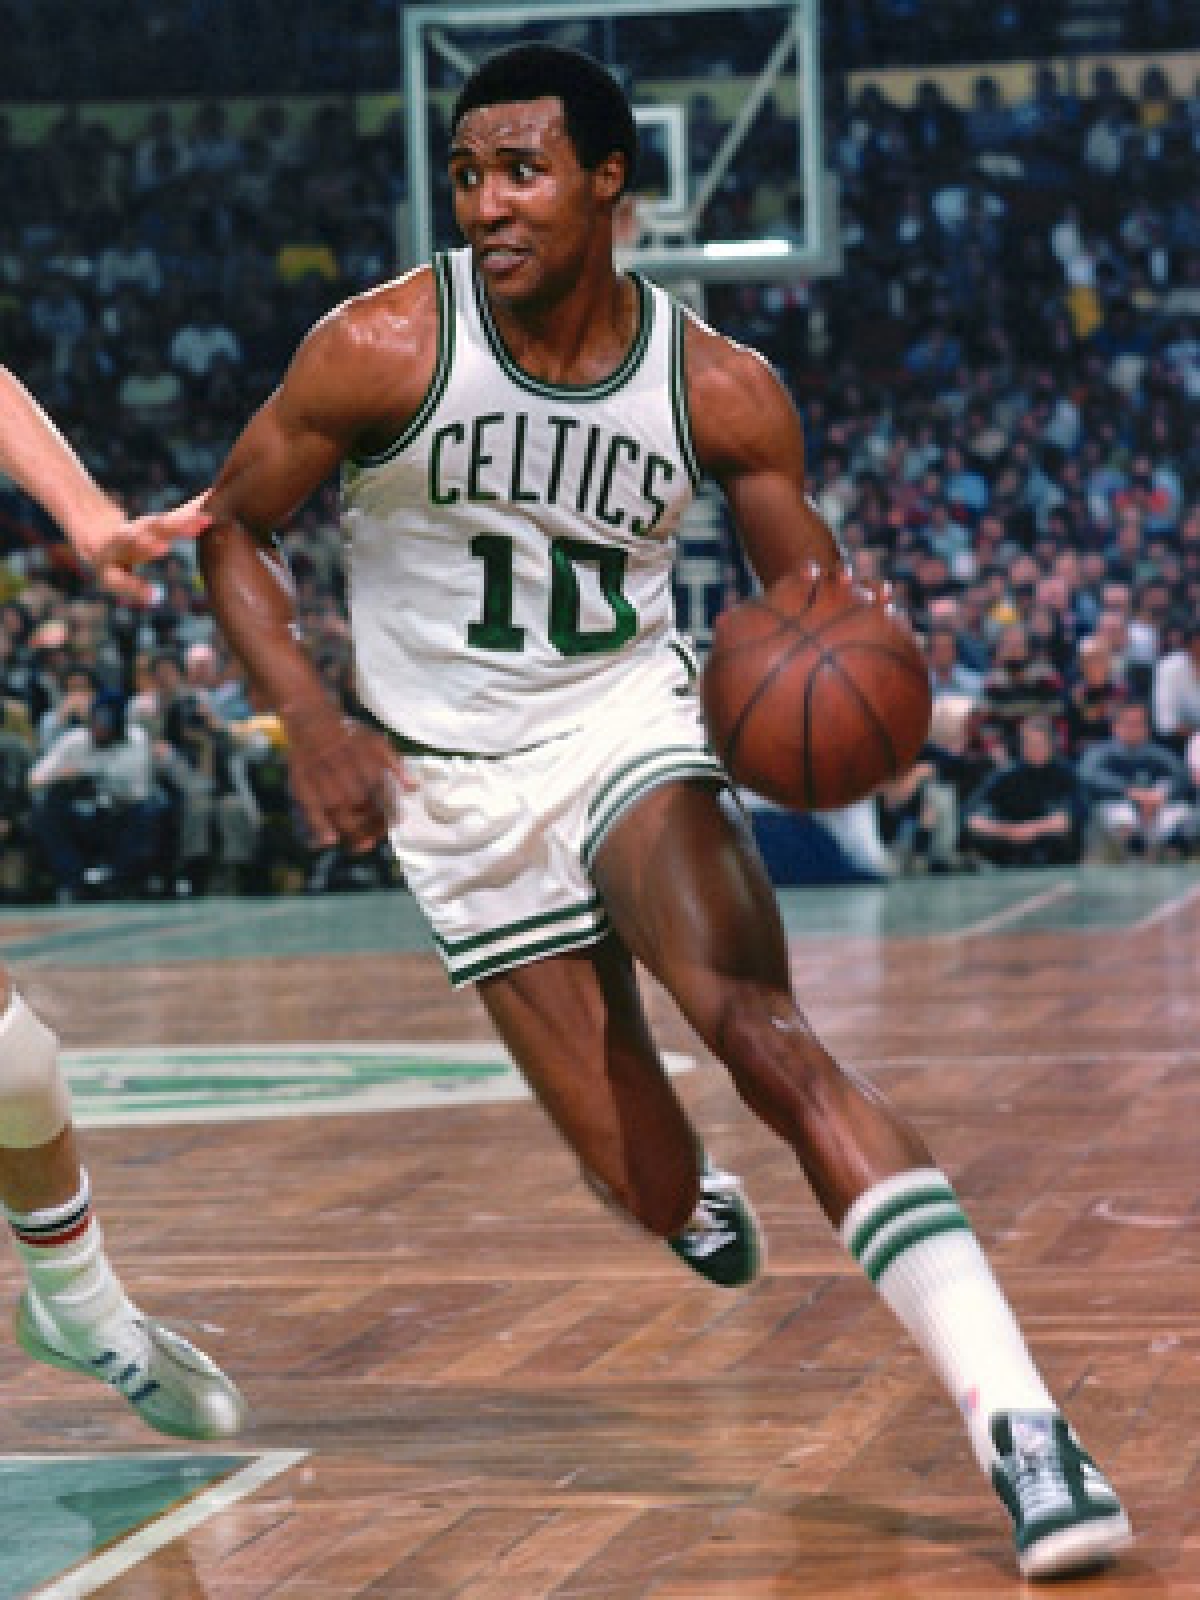 Jo Jo White's legacy keeps growing as he joins our 75th Anniversary All- Celtics Team ☘️